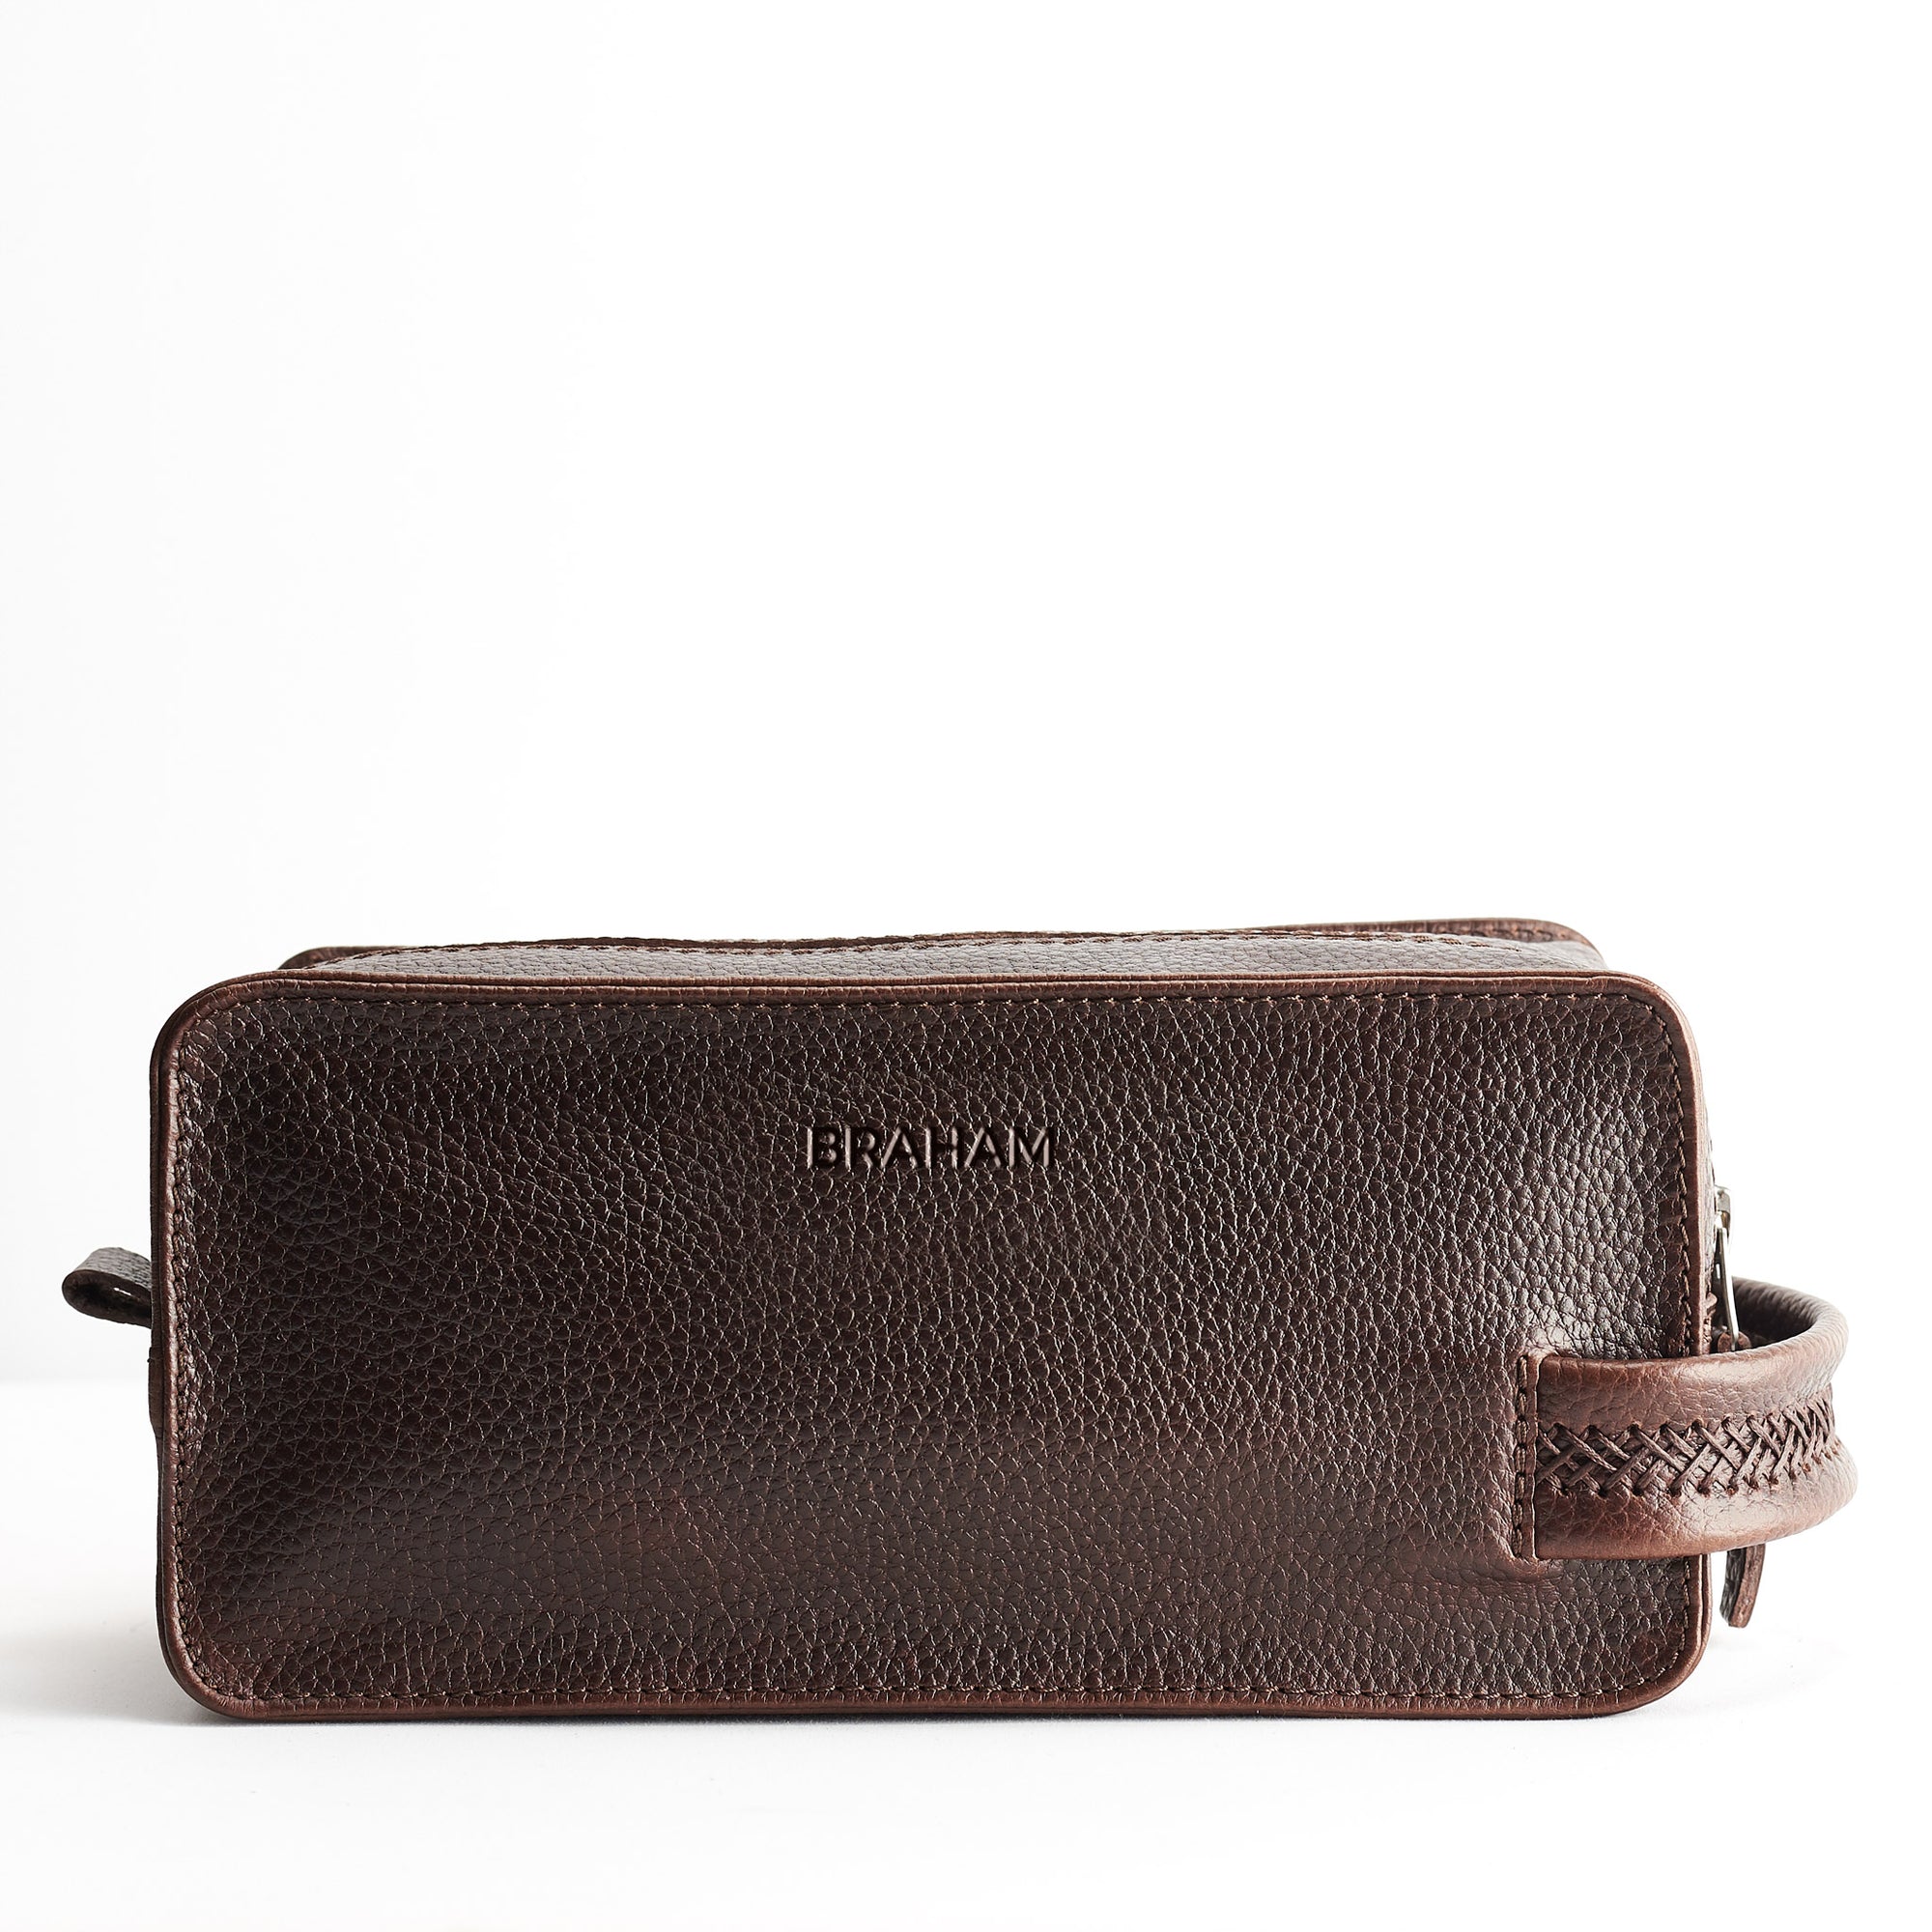 Custom engraving. Dark Brown leather toiletry, shaving bag with hand stitched handle. Groomsmen gifts